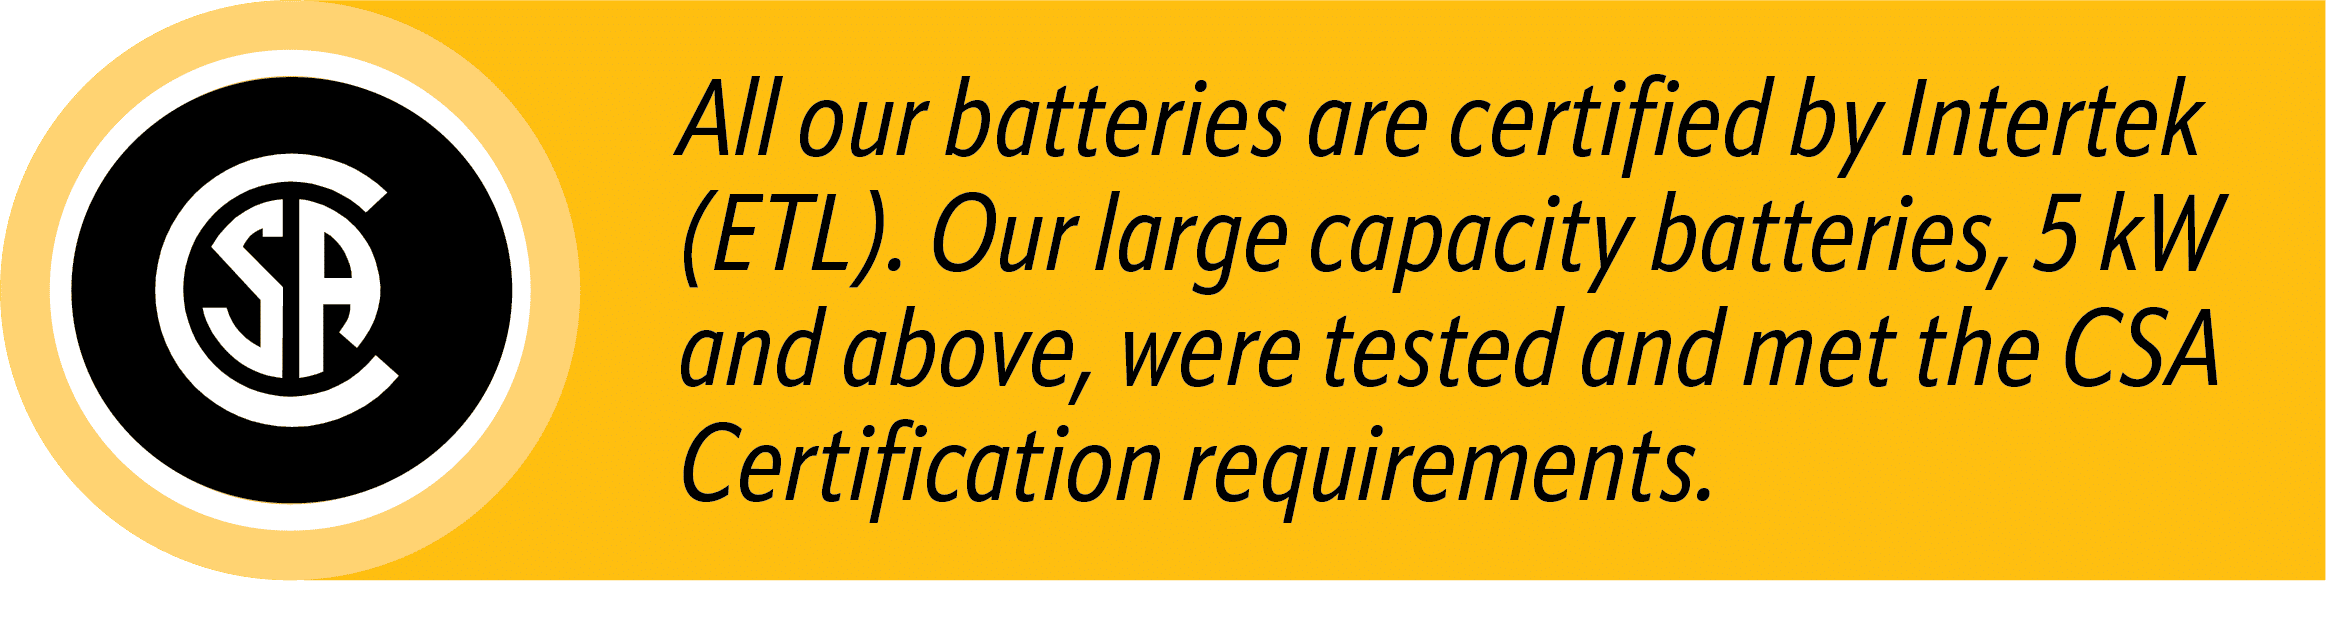 All Volthium lithium batteries are certified by Intertek (ETL). Our large capacity batteries, 5 kW and above, were tested and met the CSA Certification requirements.